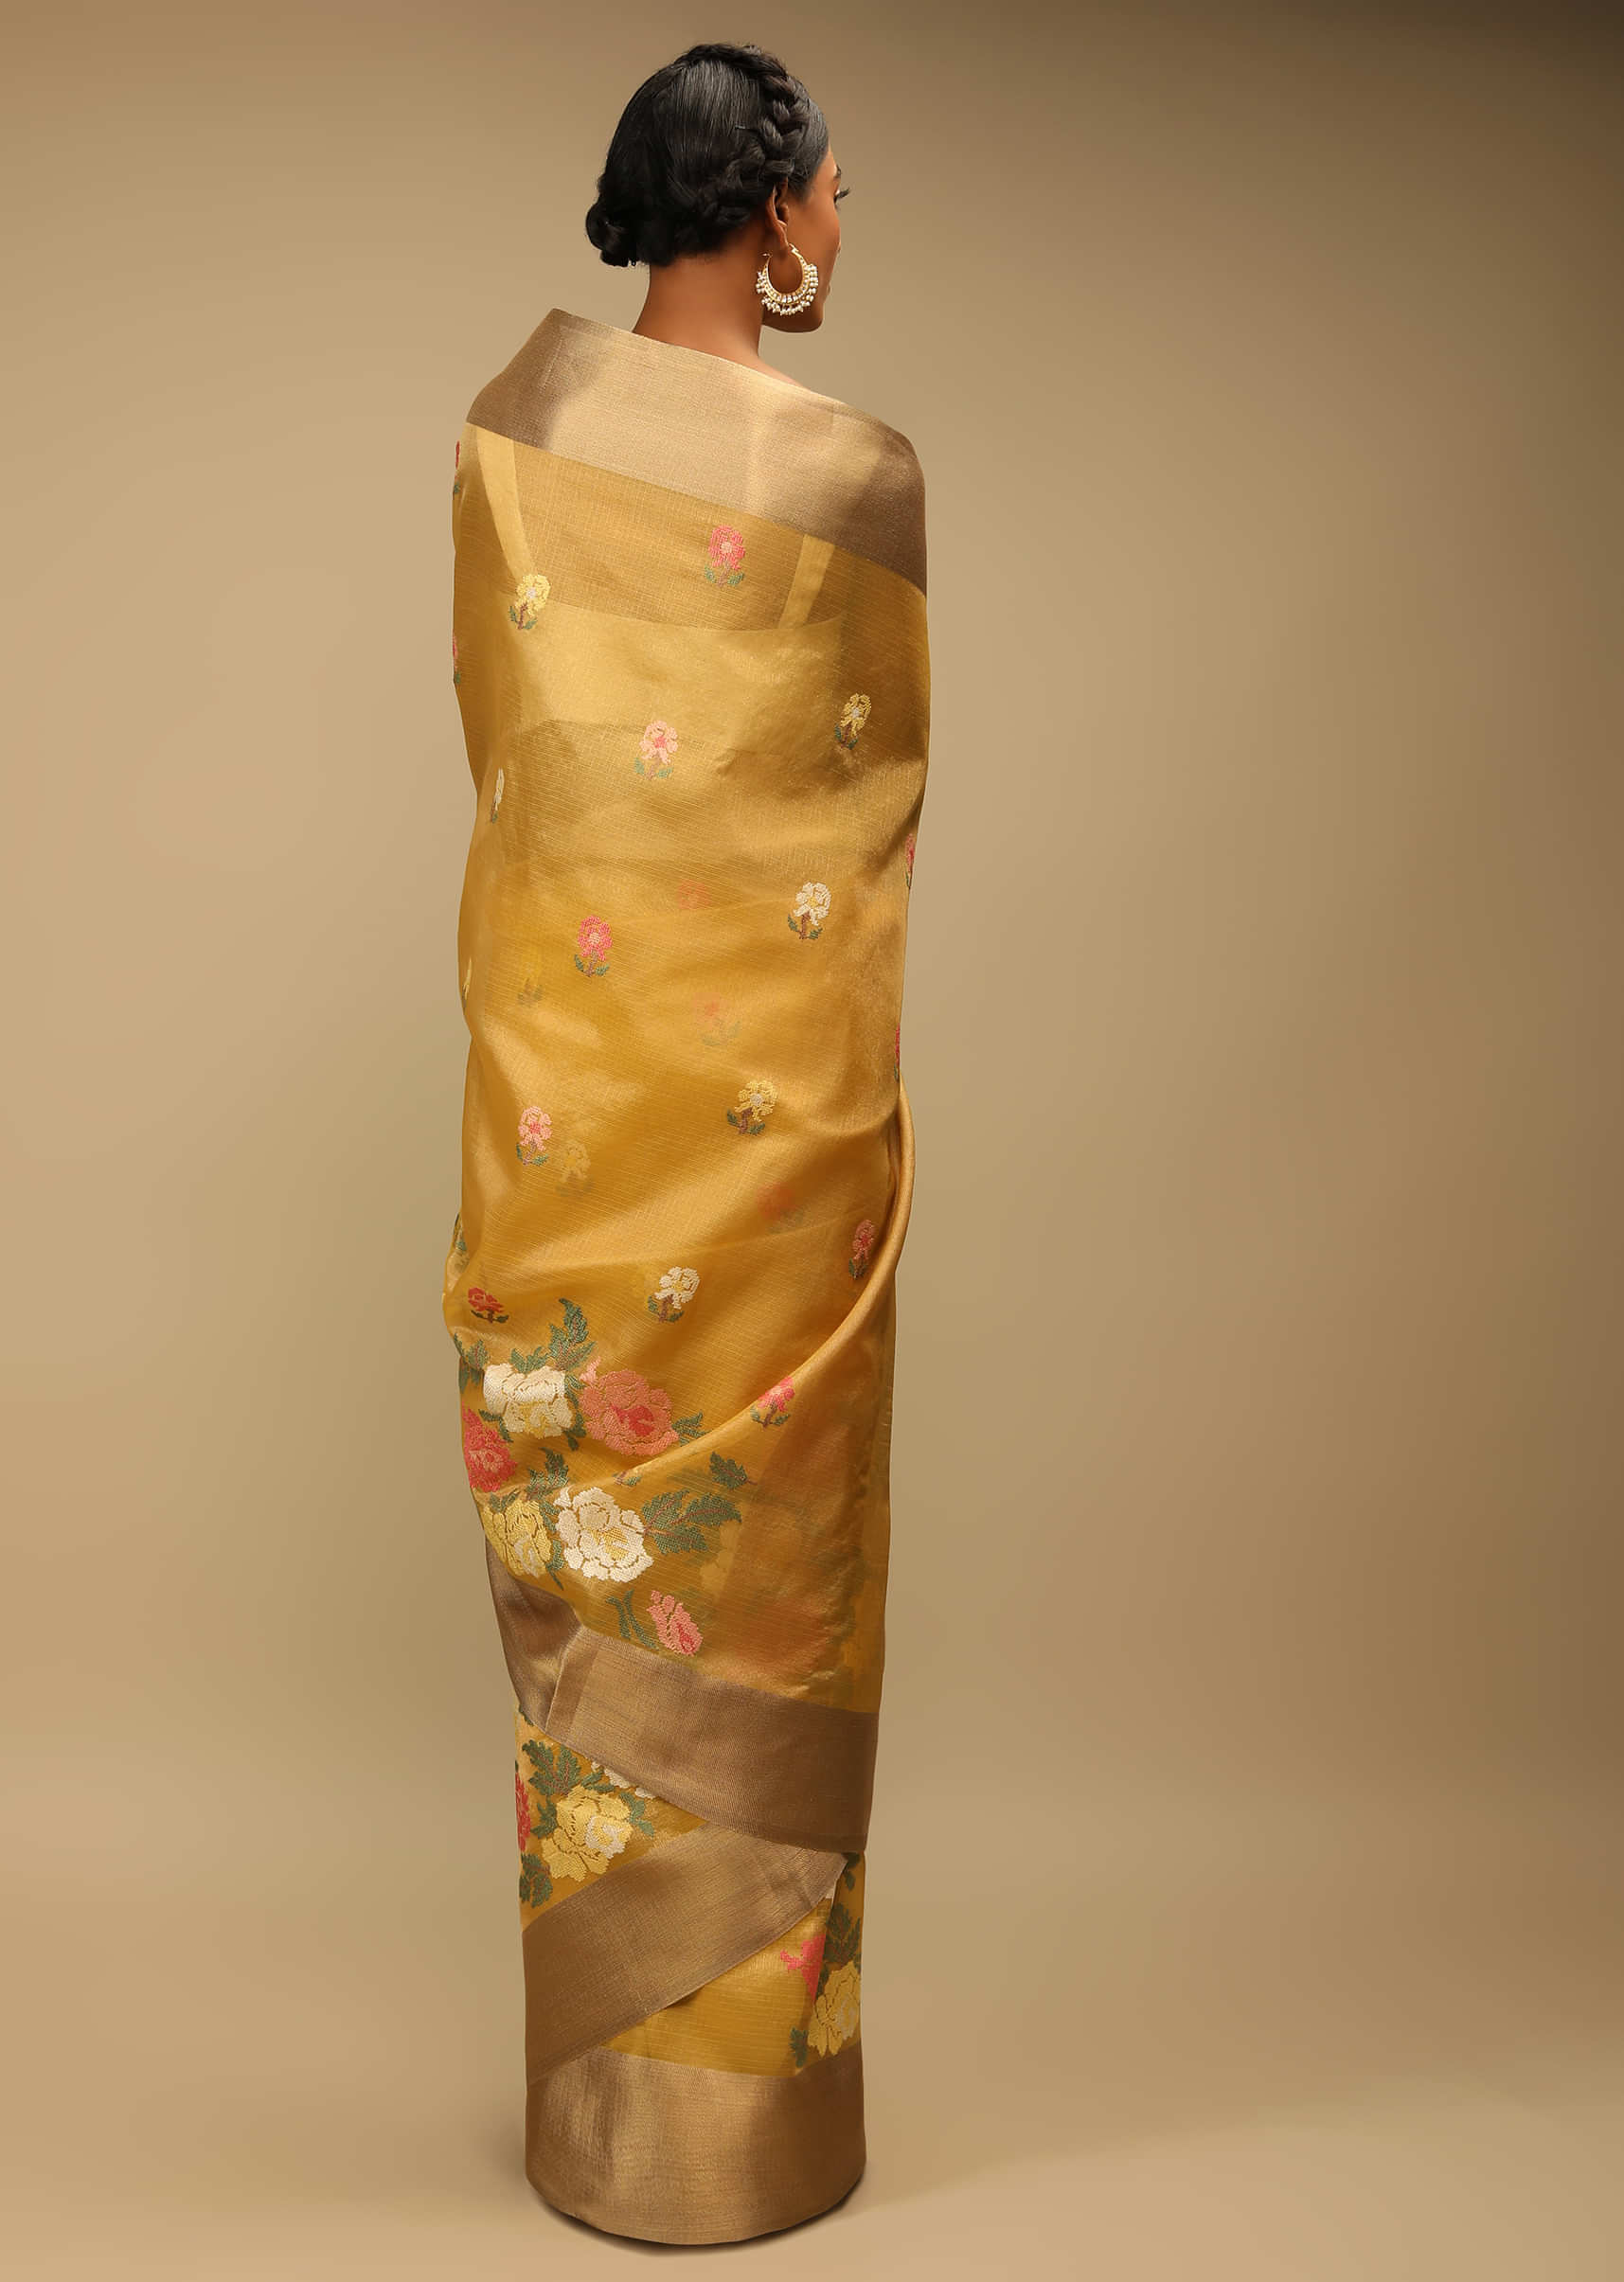 Mustard Saree In Zari Kota Silk With Multi Colored Resham Embroidered Flowers On The Border  